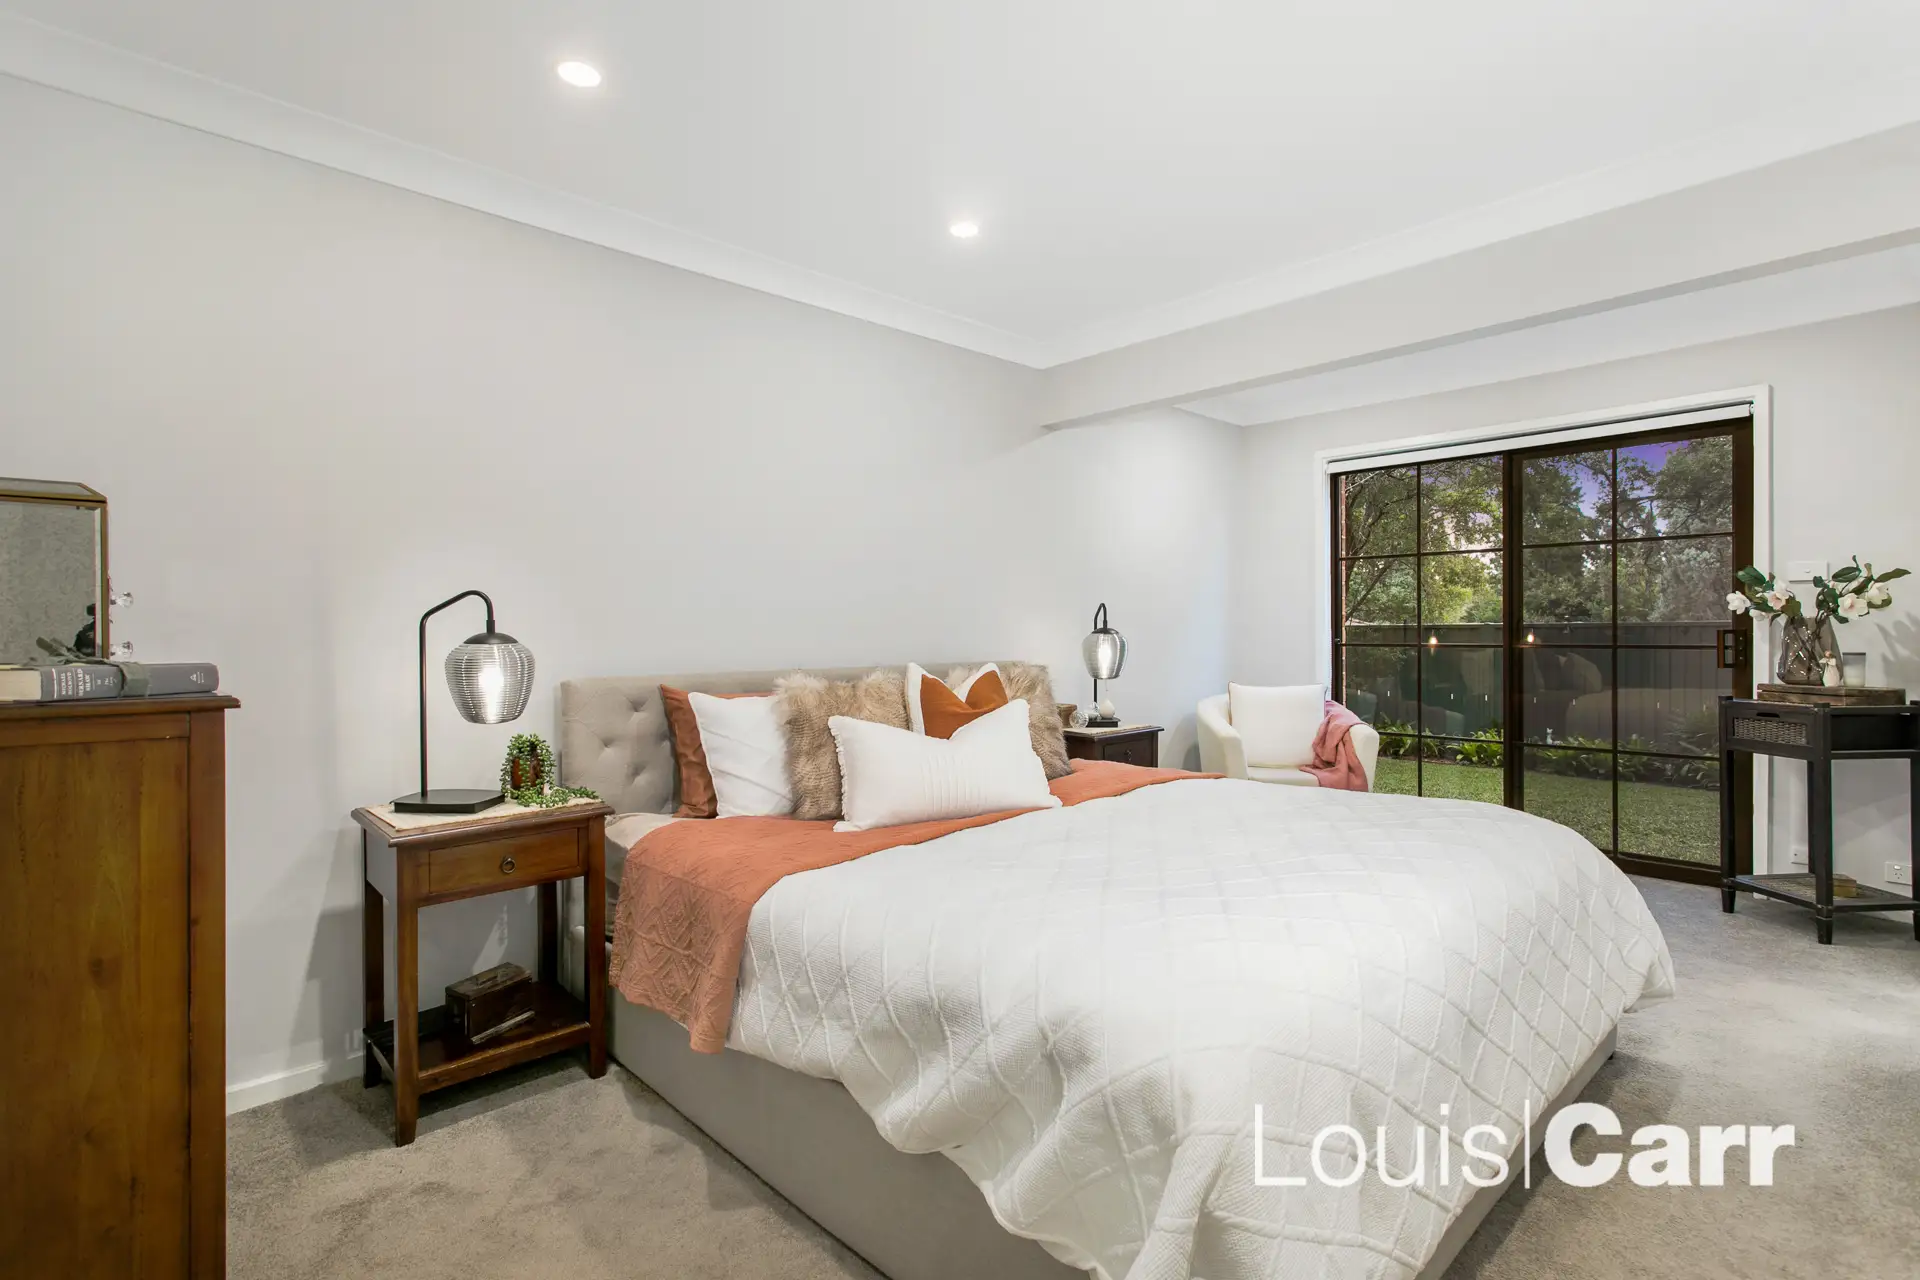 Photo #10: 77 Highs Road, West Pennant Hills - Sold by Louis Carr Real Estate